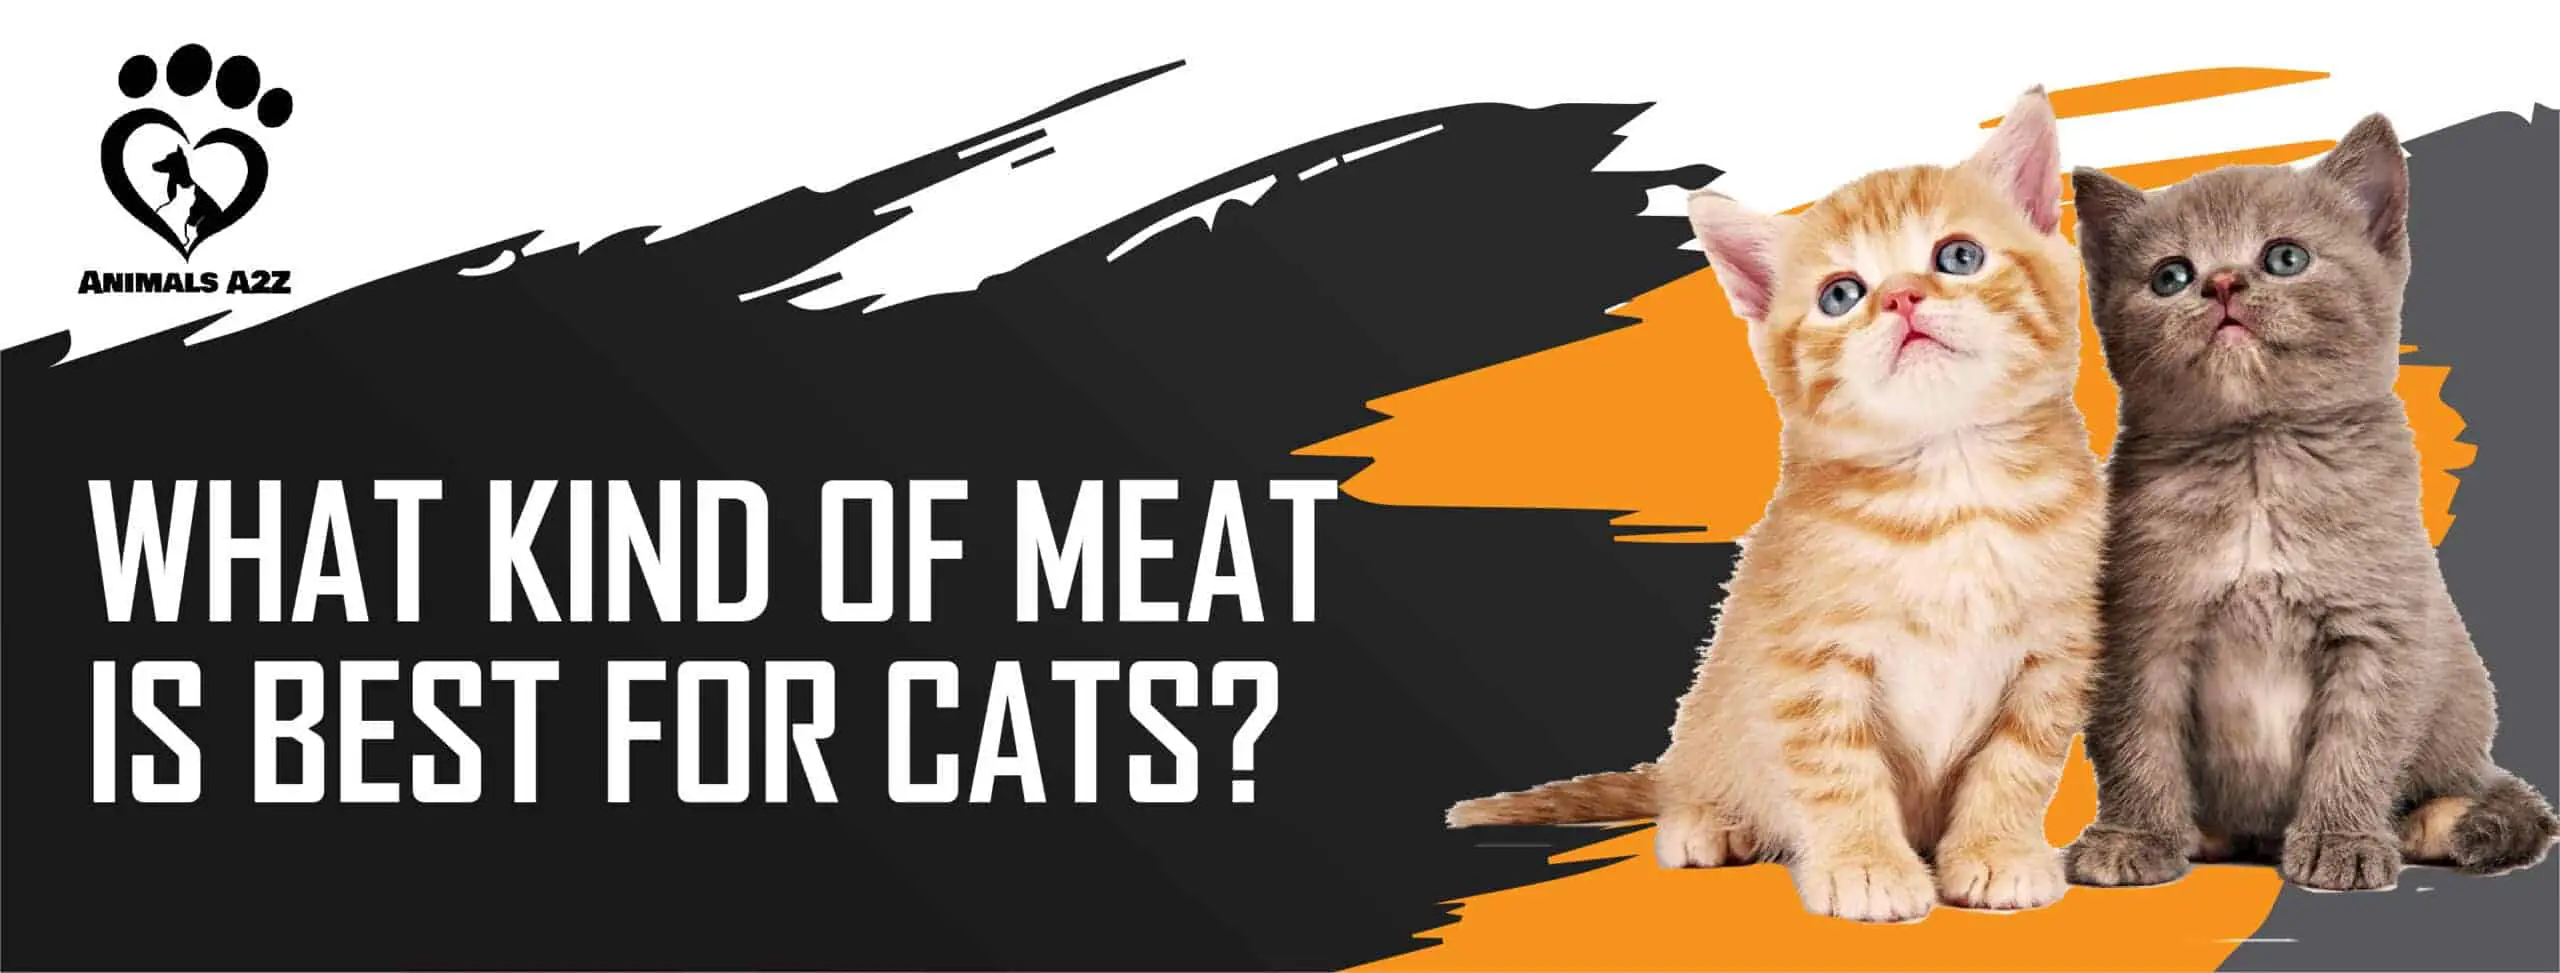 What kind of meat is best for cats